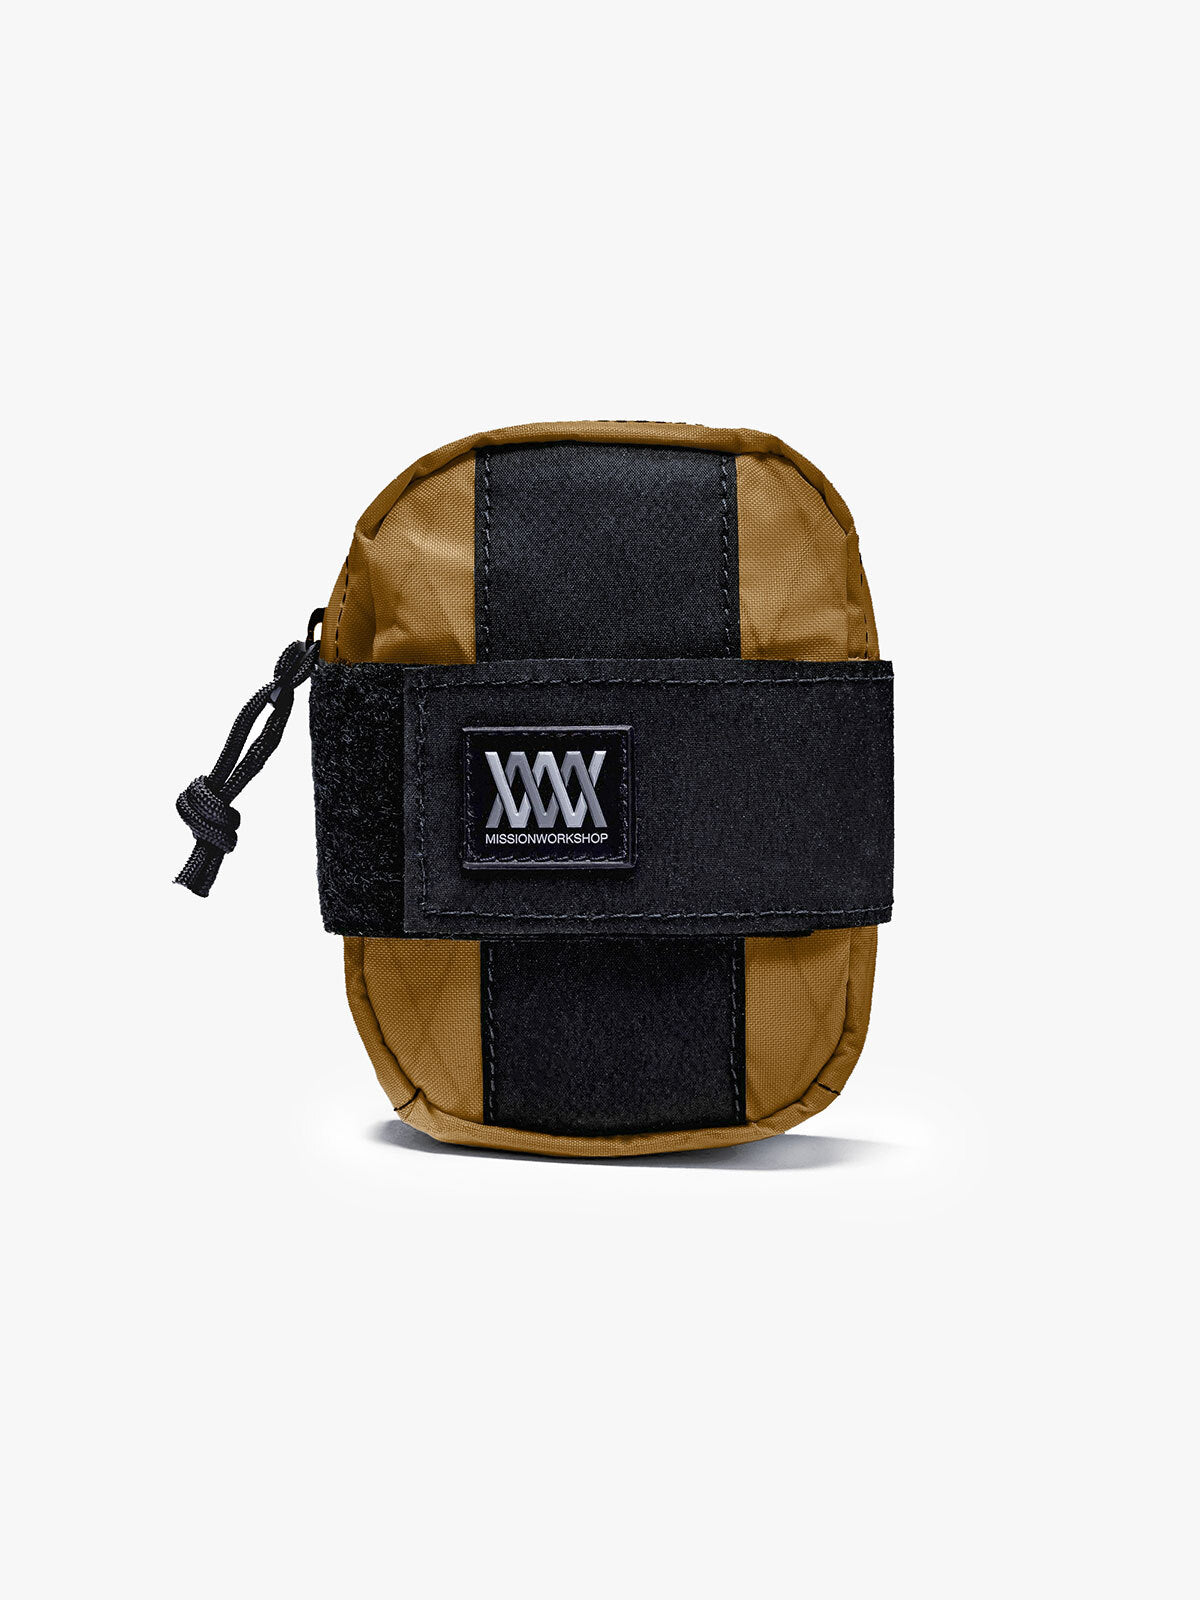 Mission Saddle Bag by Mission Workshop - Weatherproof Bags & Technical Apparel - San Francisco & Los Angeles - Built to endure - Guaranteed forever